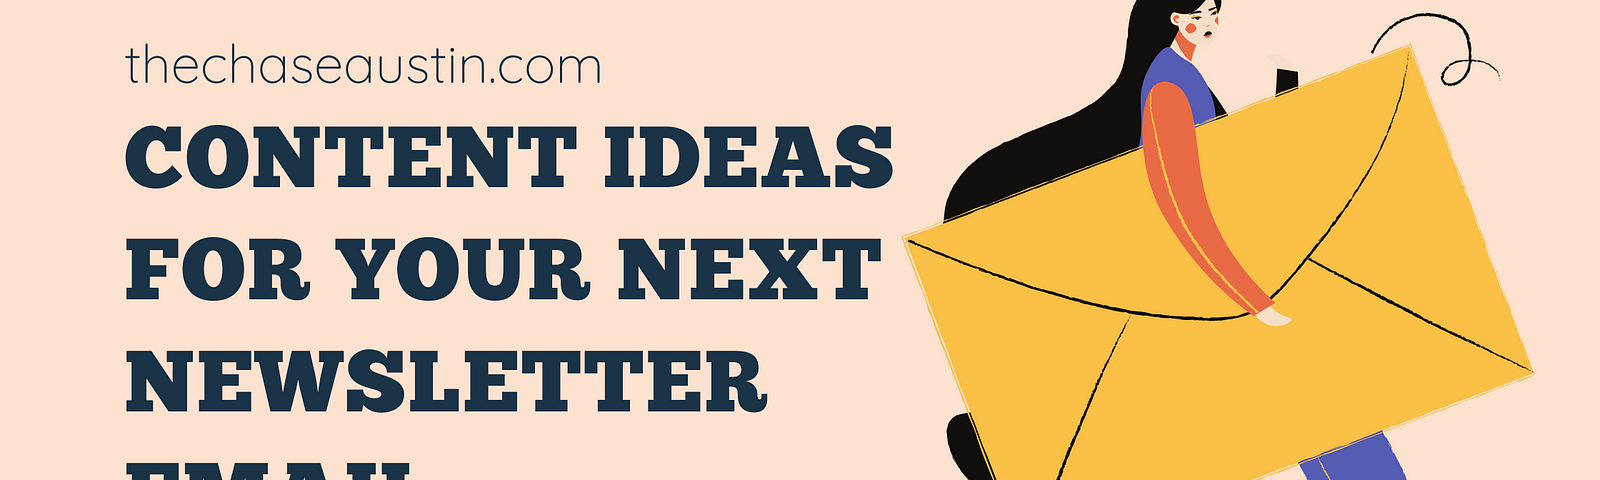 Content ideas for your next newsletter